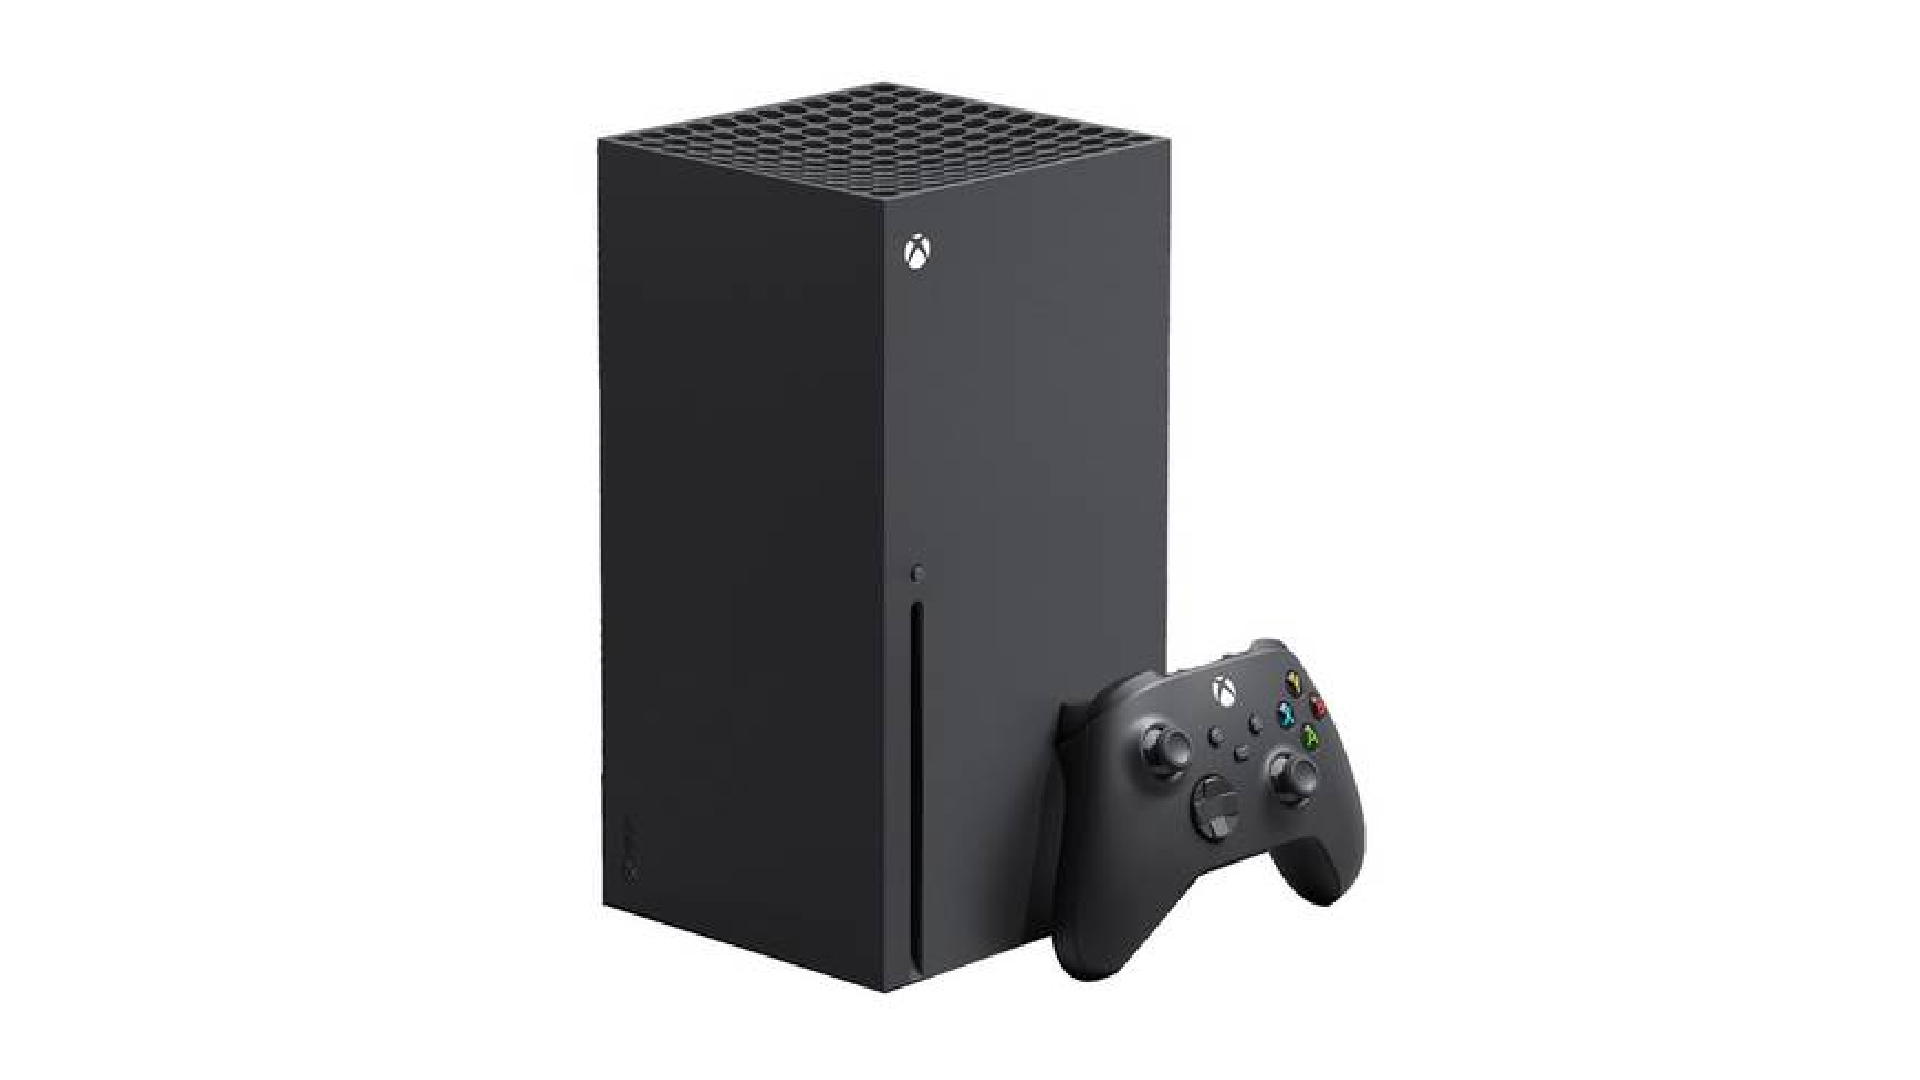 Image for Pick up an Xbox Series X for £429 today from Very this Cyber Monday